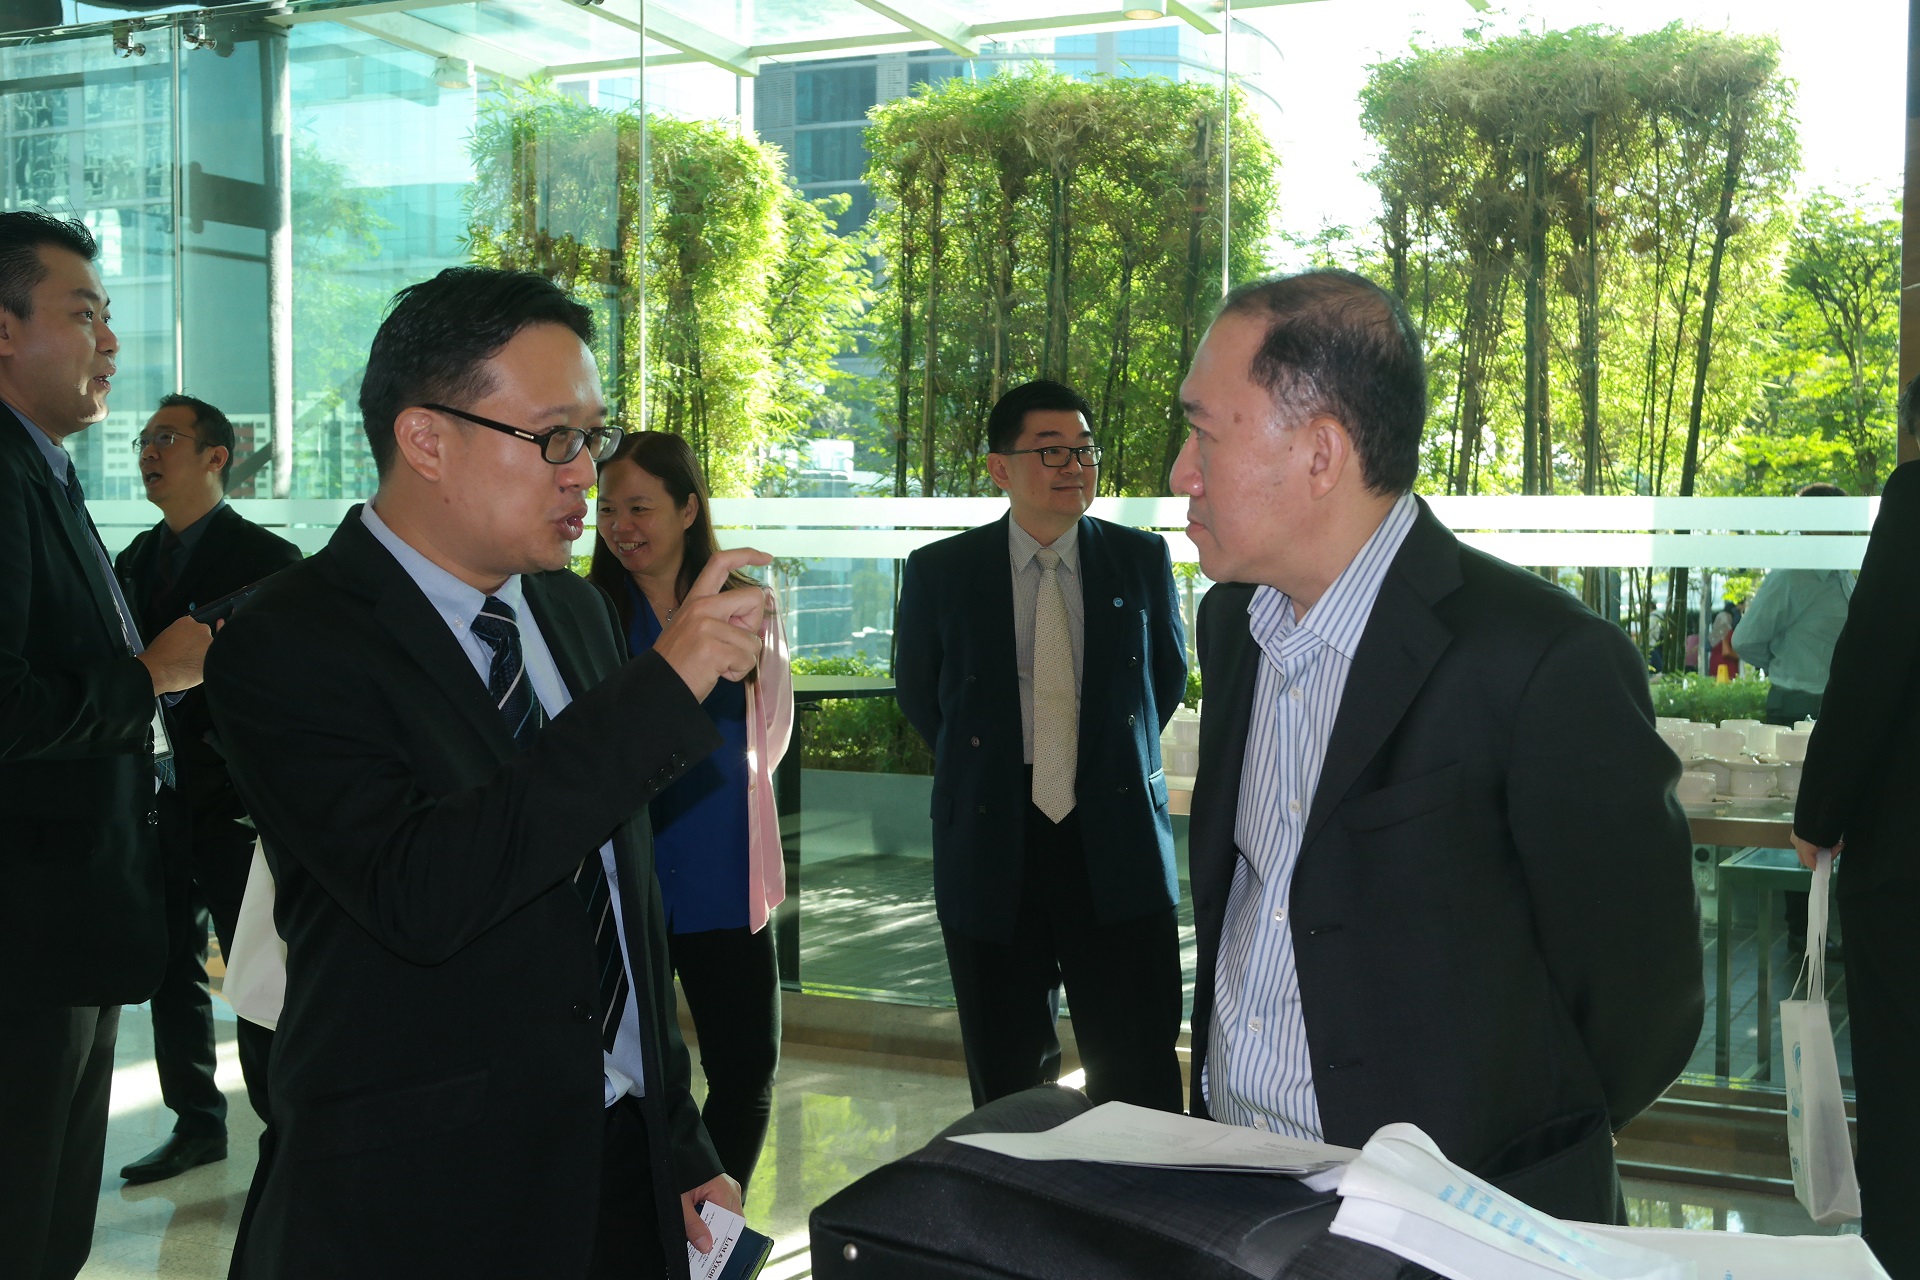 Cheng&Co CEO interacting with participants